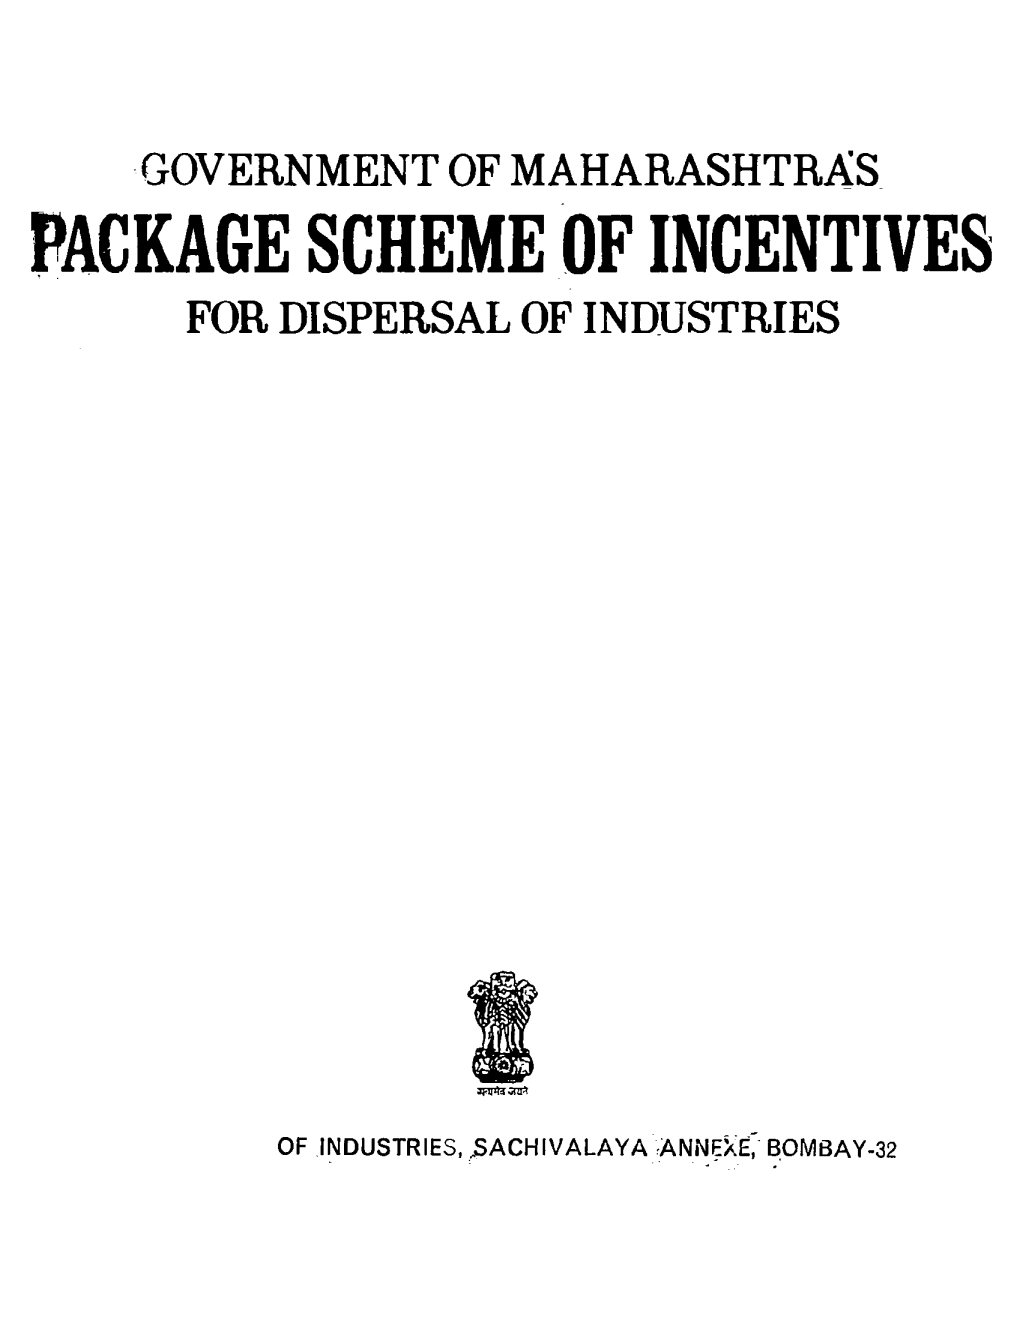 Package Scheme of Incentives for Dispersal of Industries